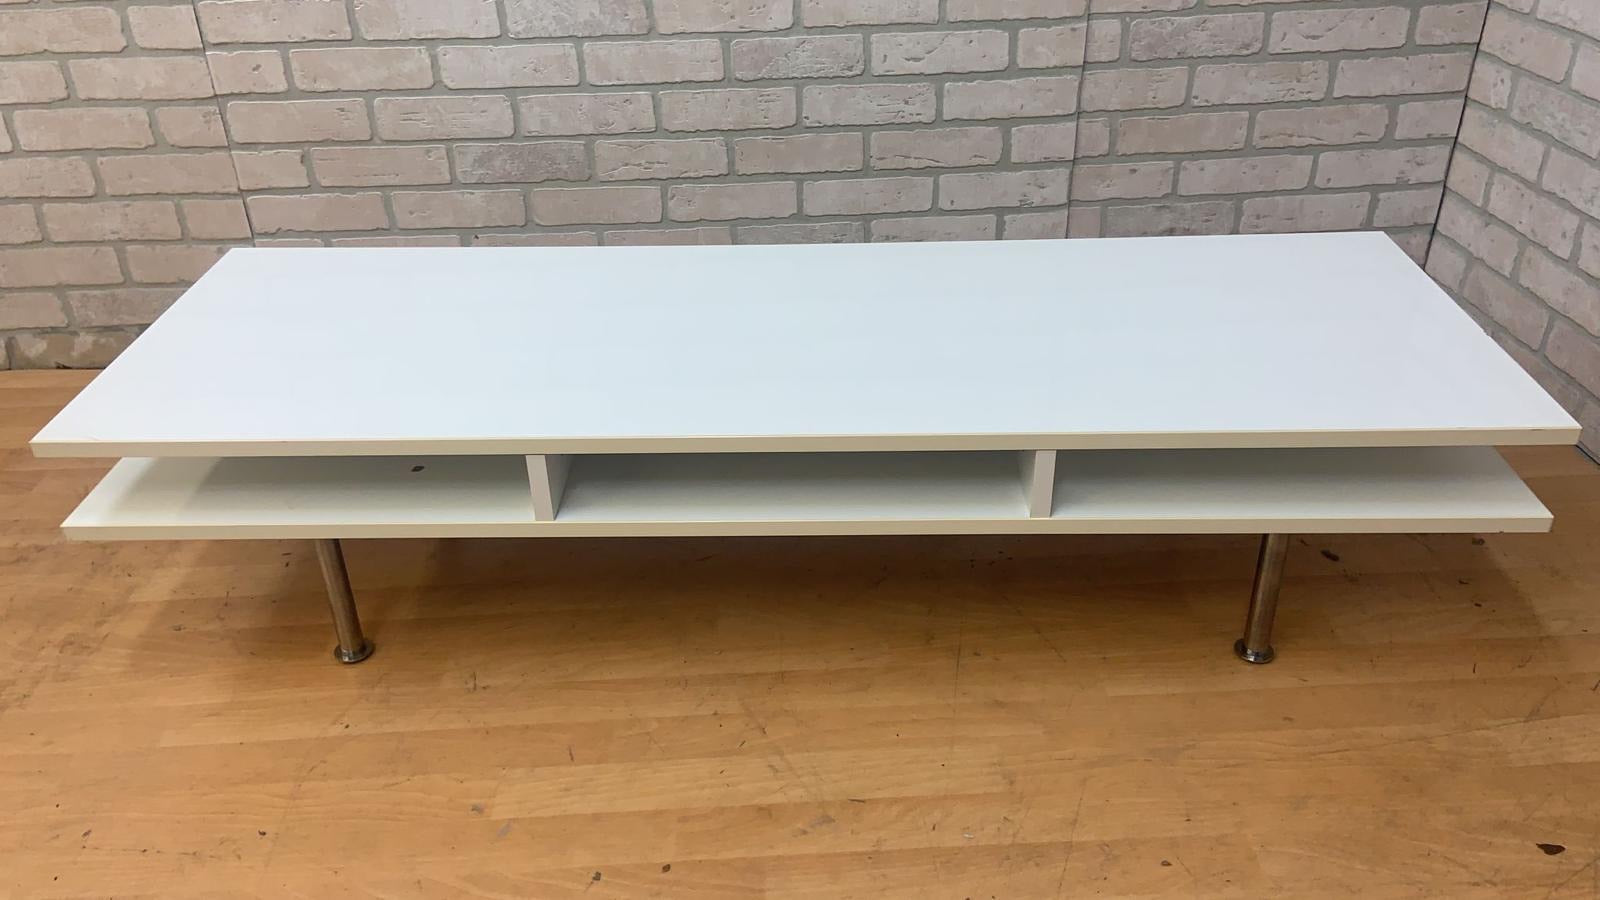 Ikea Tofteryd TV Bench in Glossy White